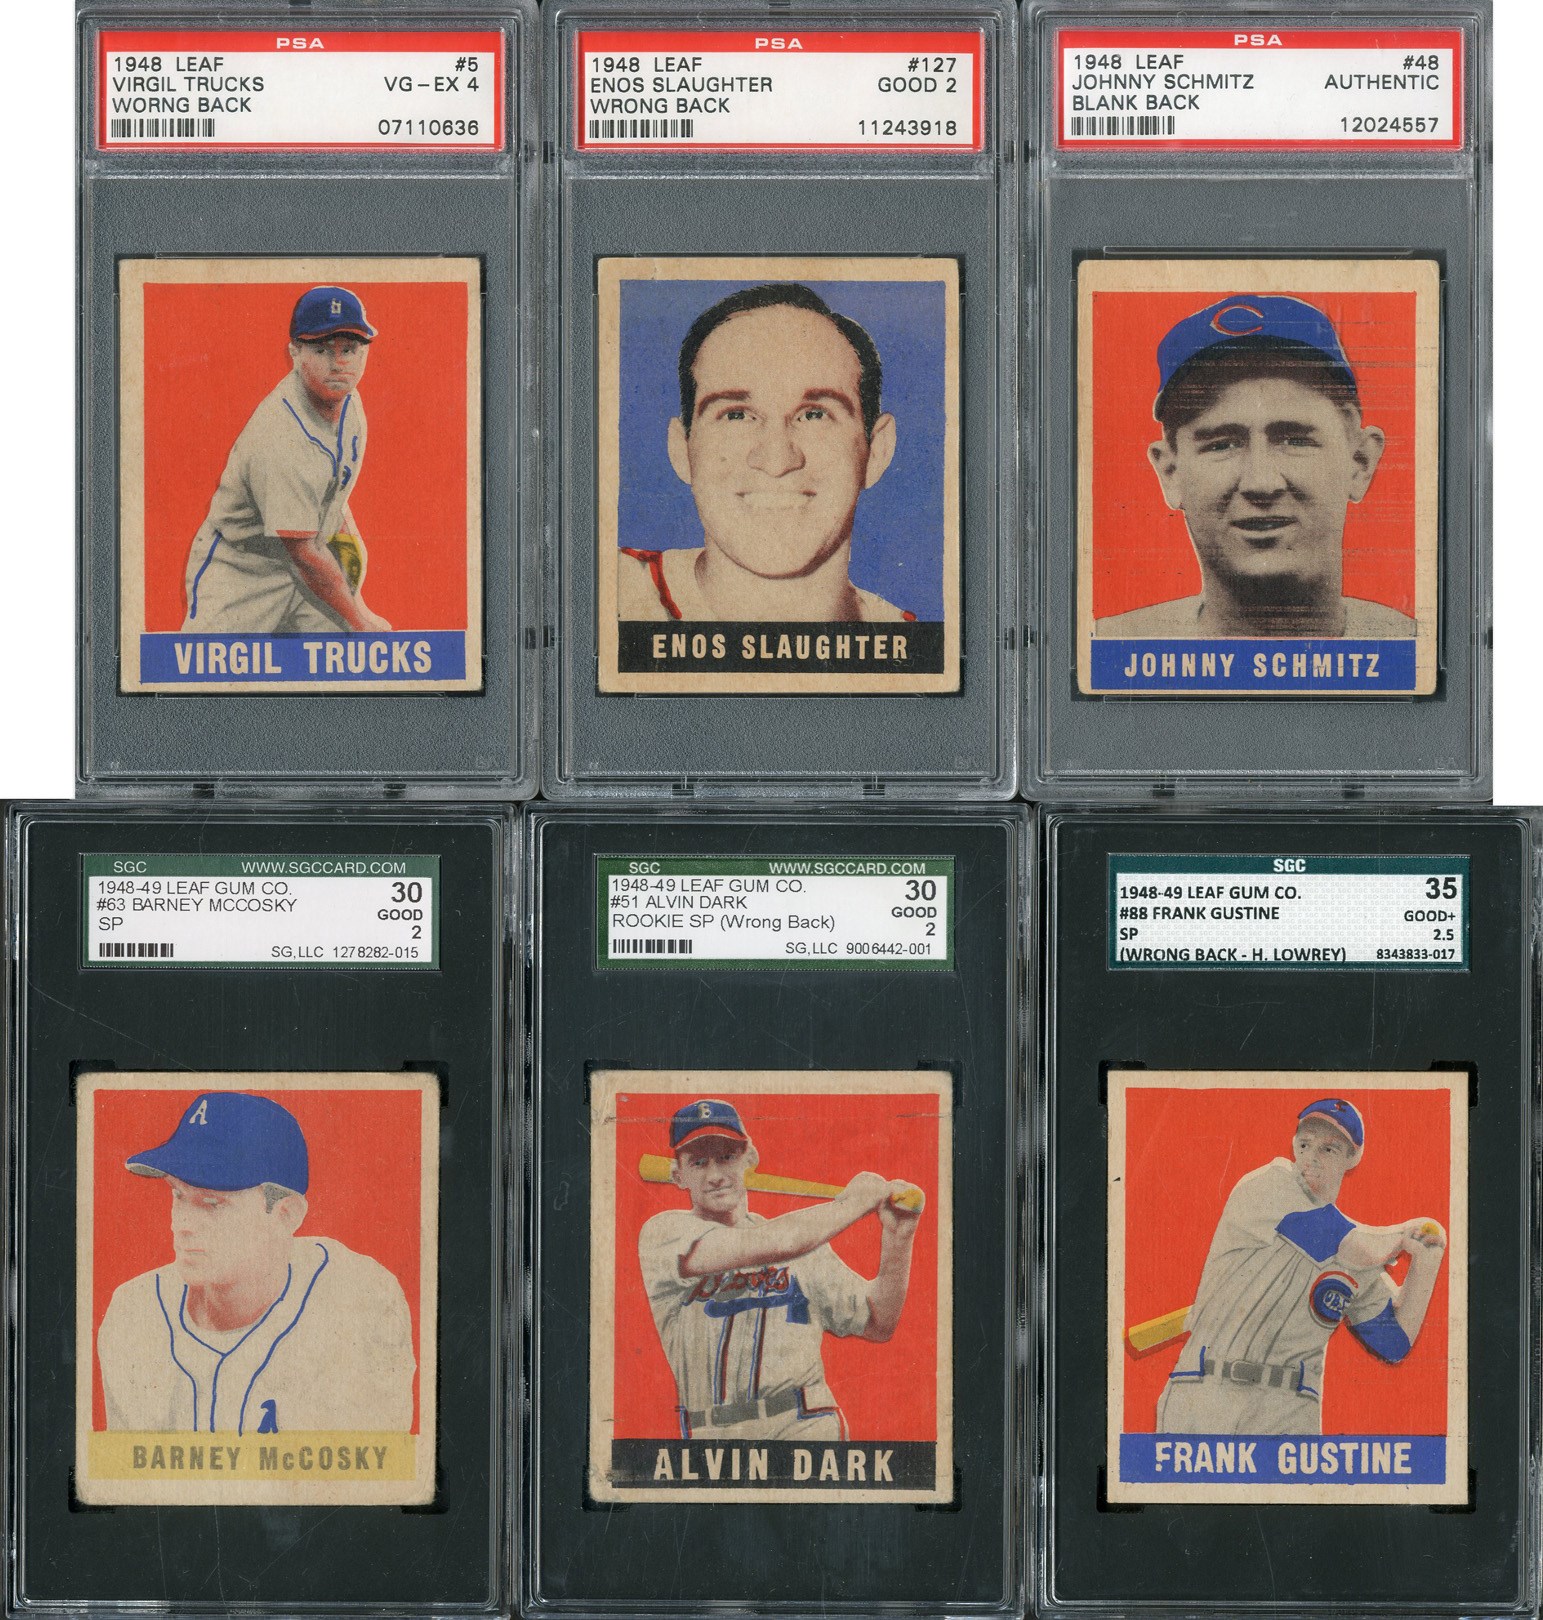 1948 Leaf PSA and SGC Graded SP Collection of Wrong Backs and Blank Backs